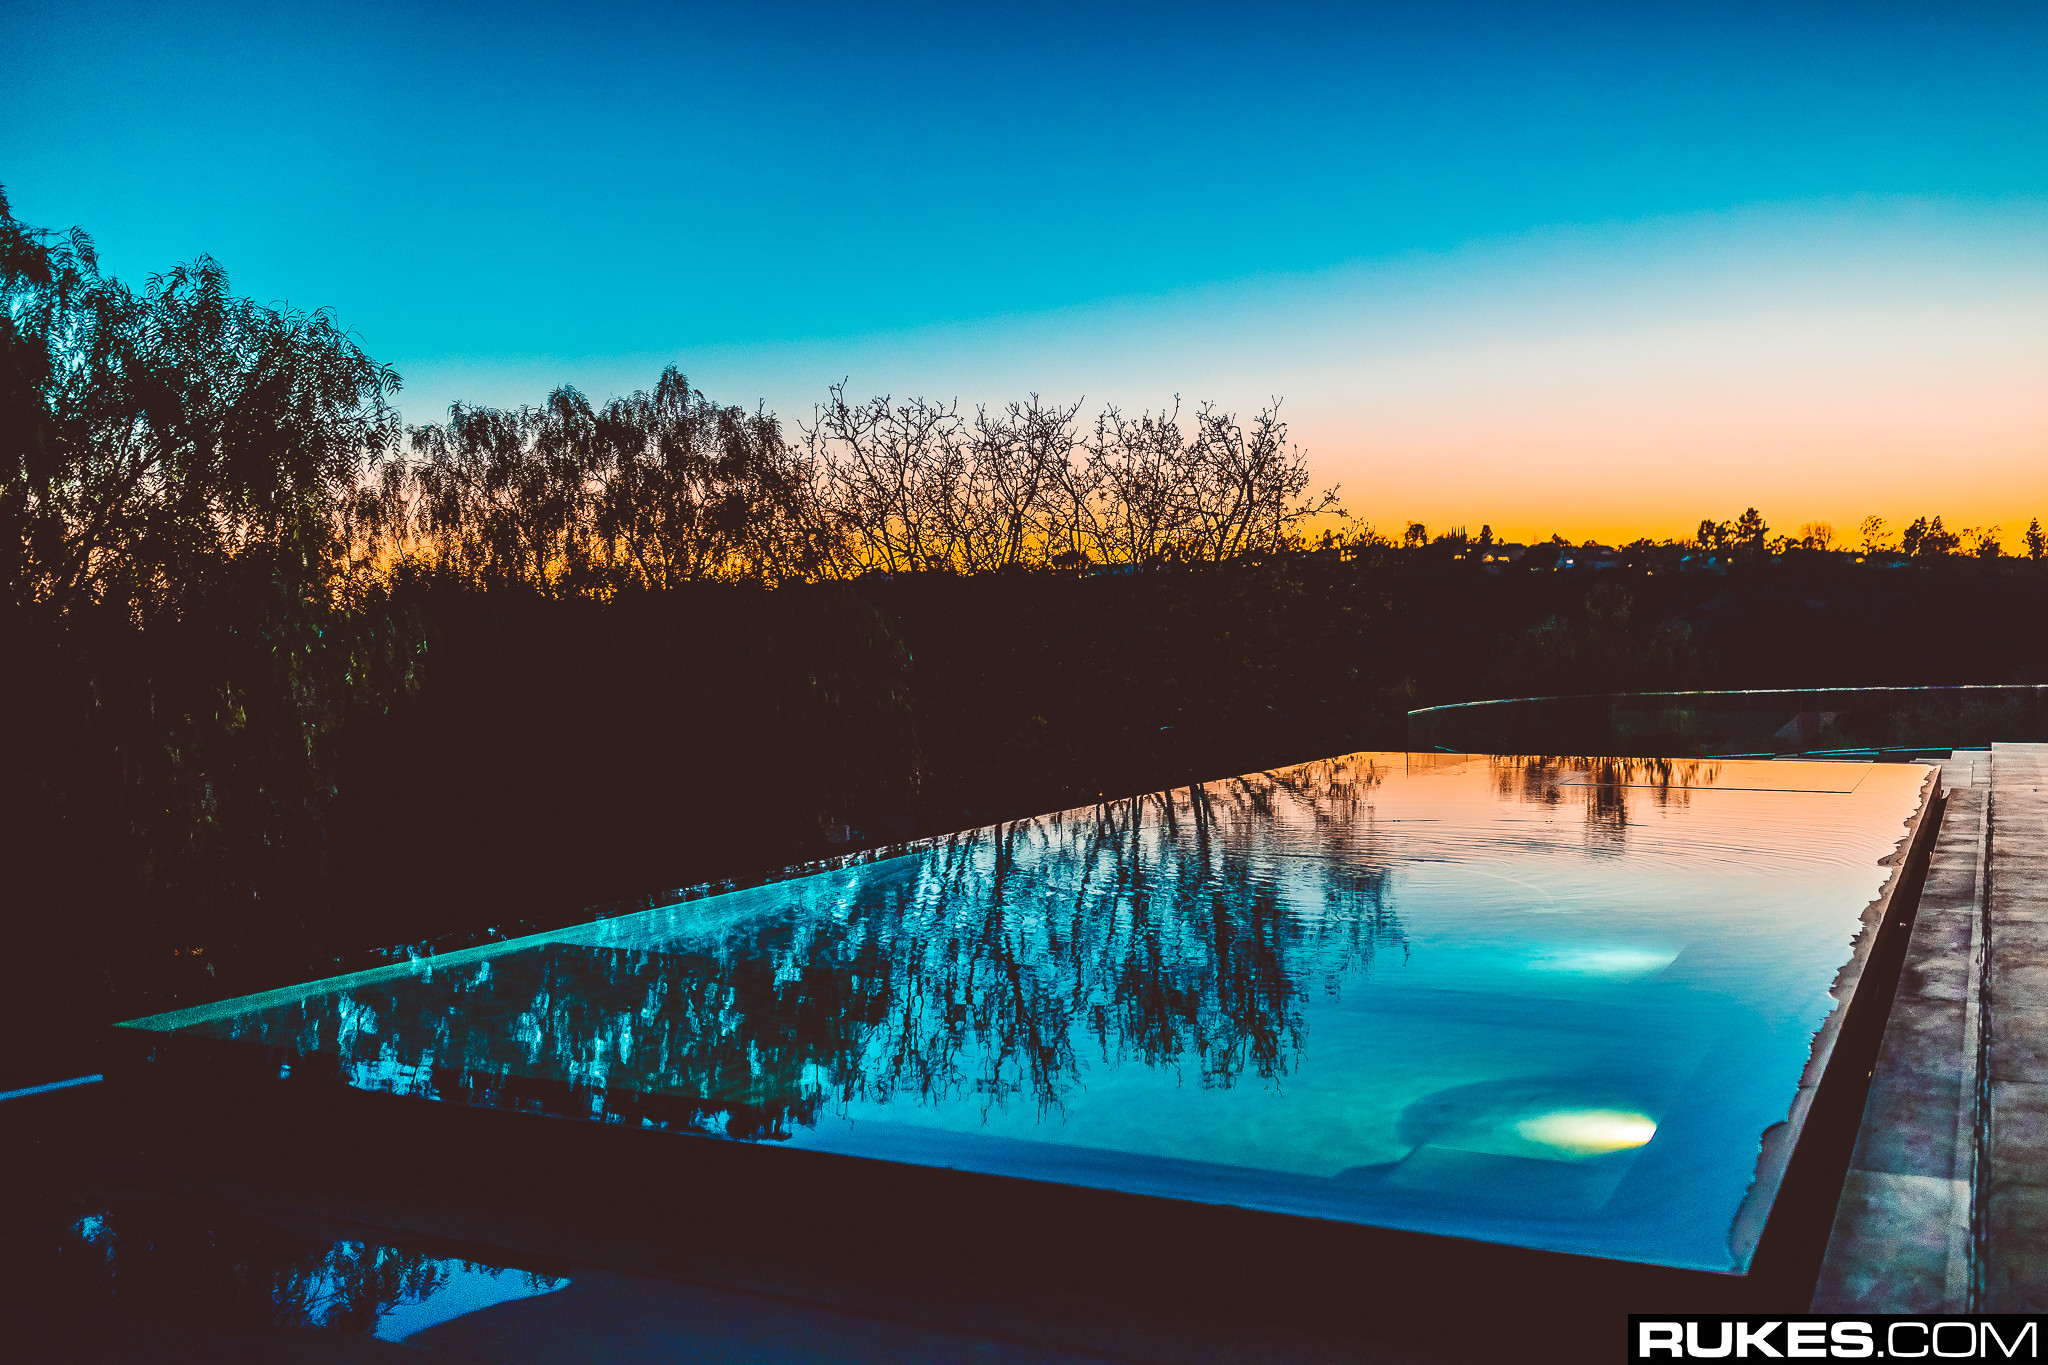 swimming pool, Reflection, Sunset, Dead trees, Rukes.com, Photography Wallpaper